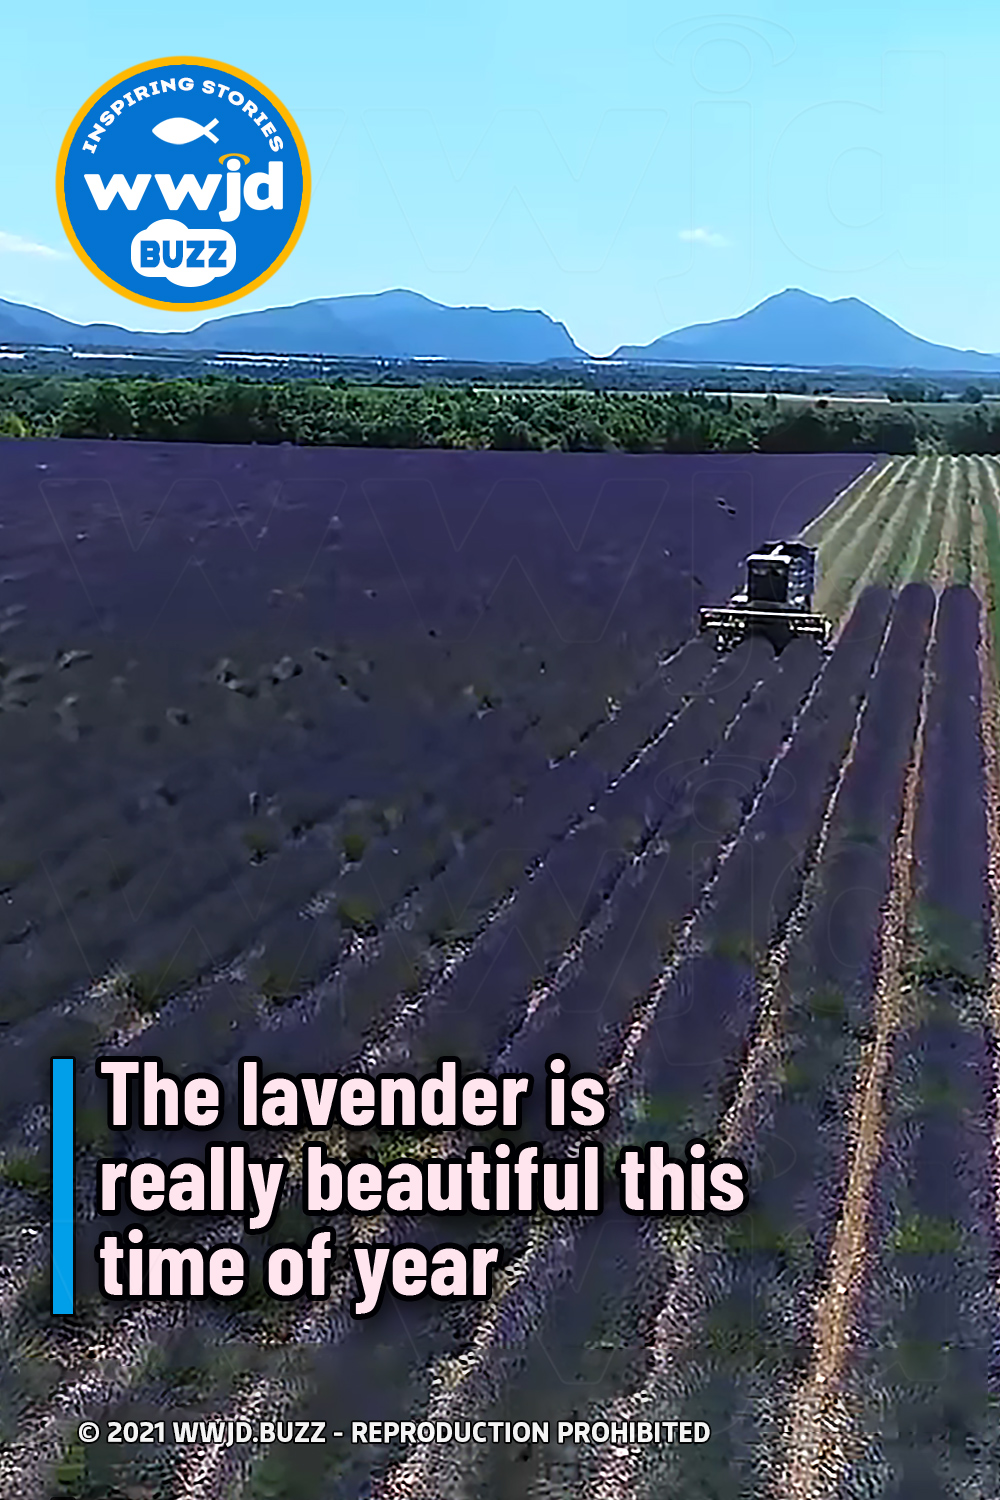 The lavender is really beautiful this time of year